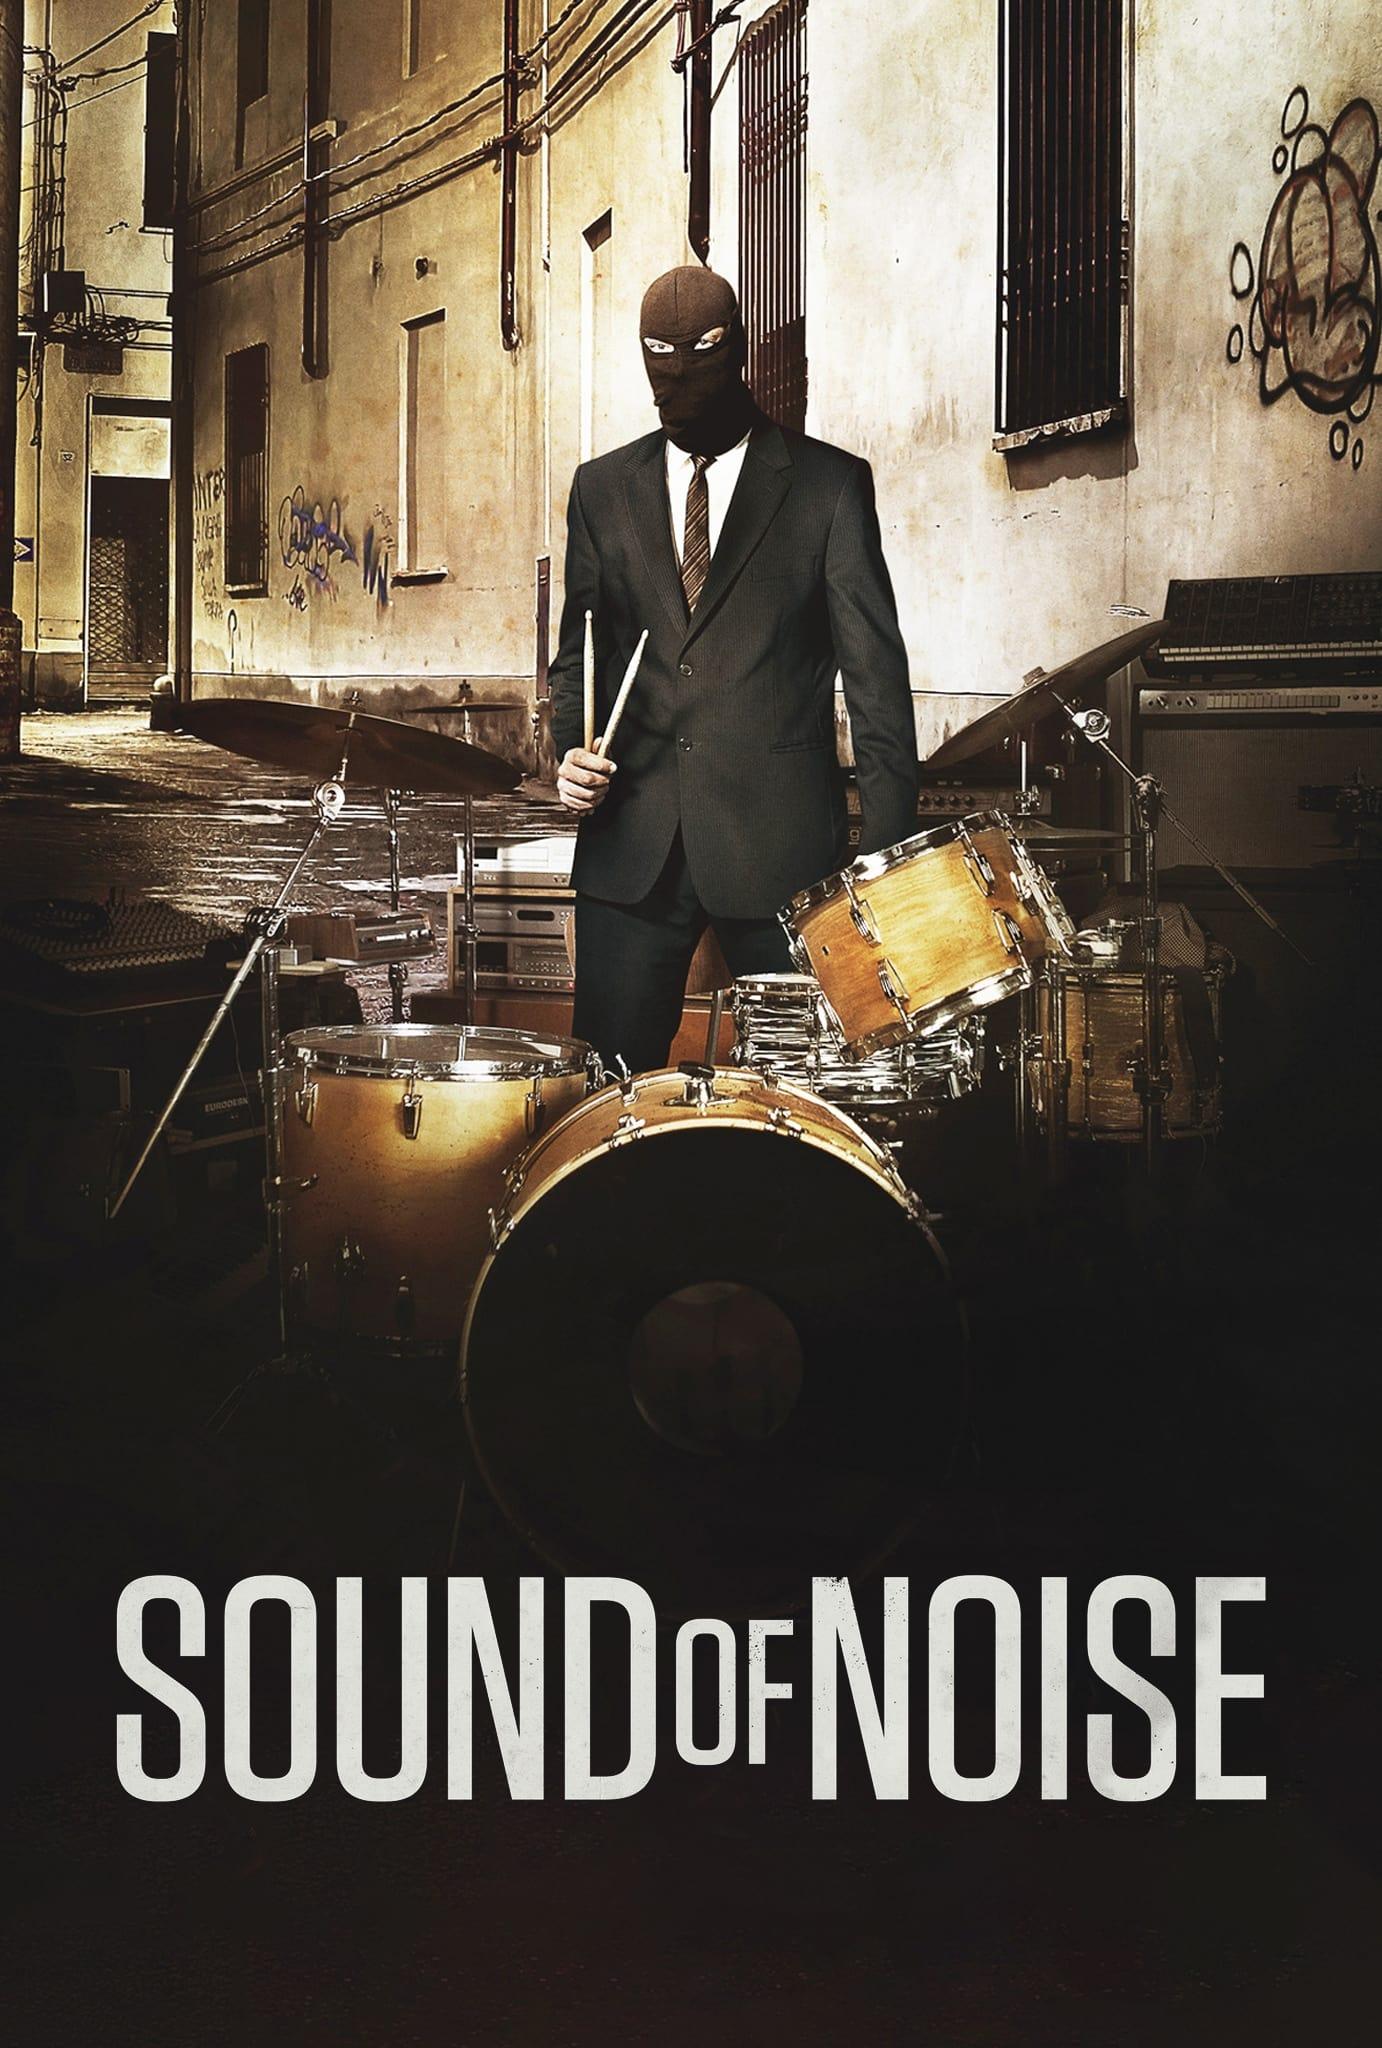 Sound of Noise poster